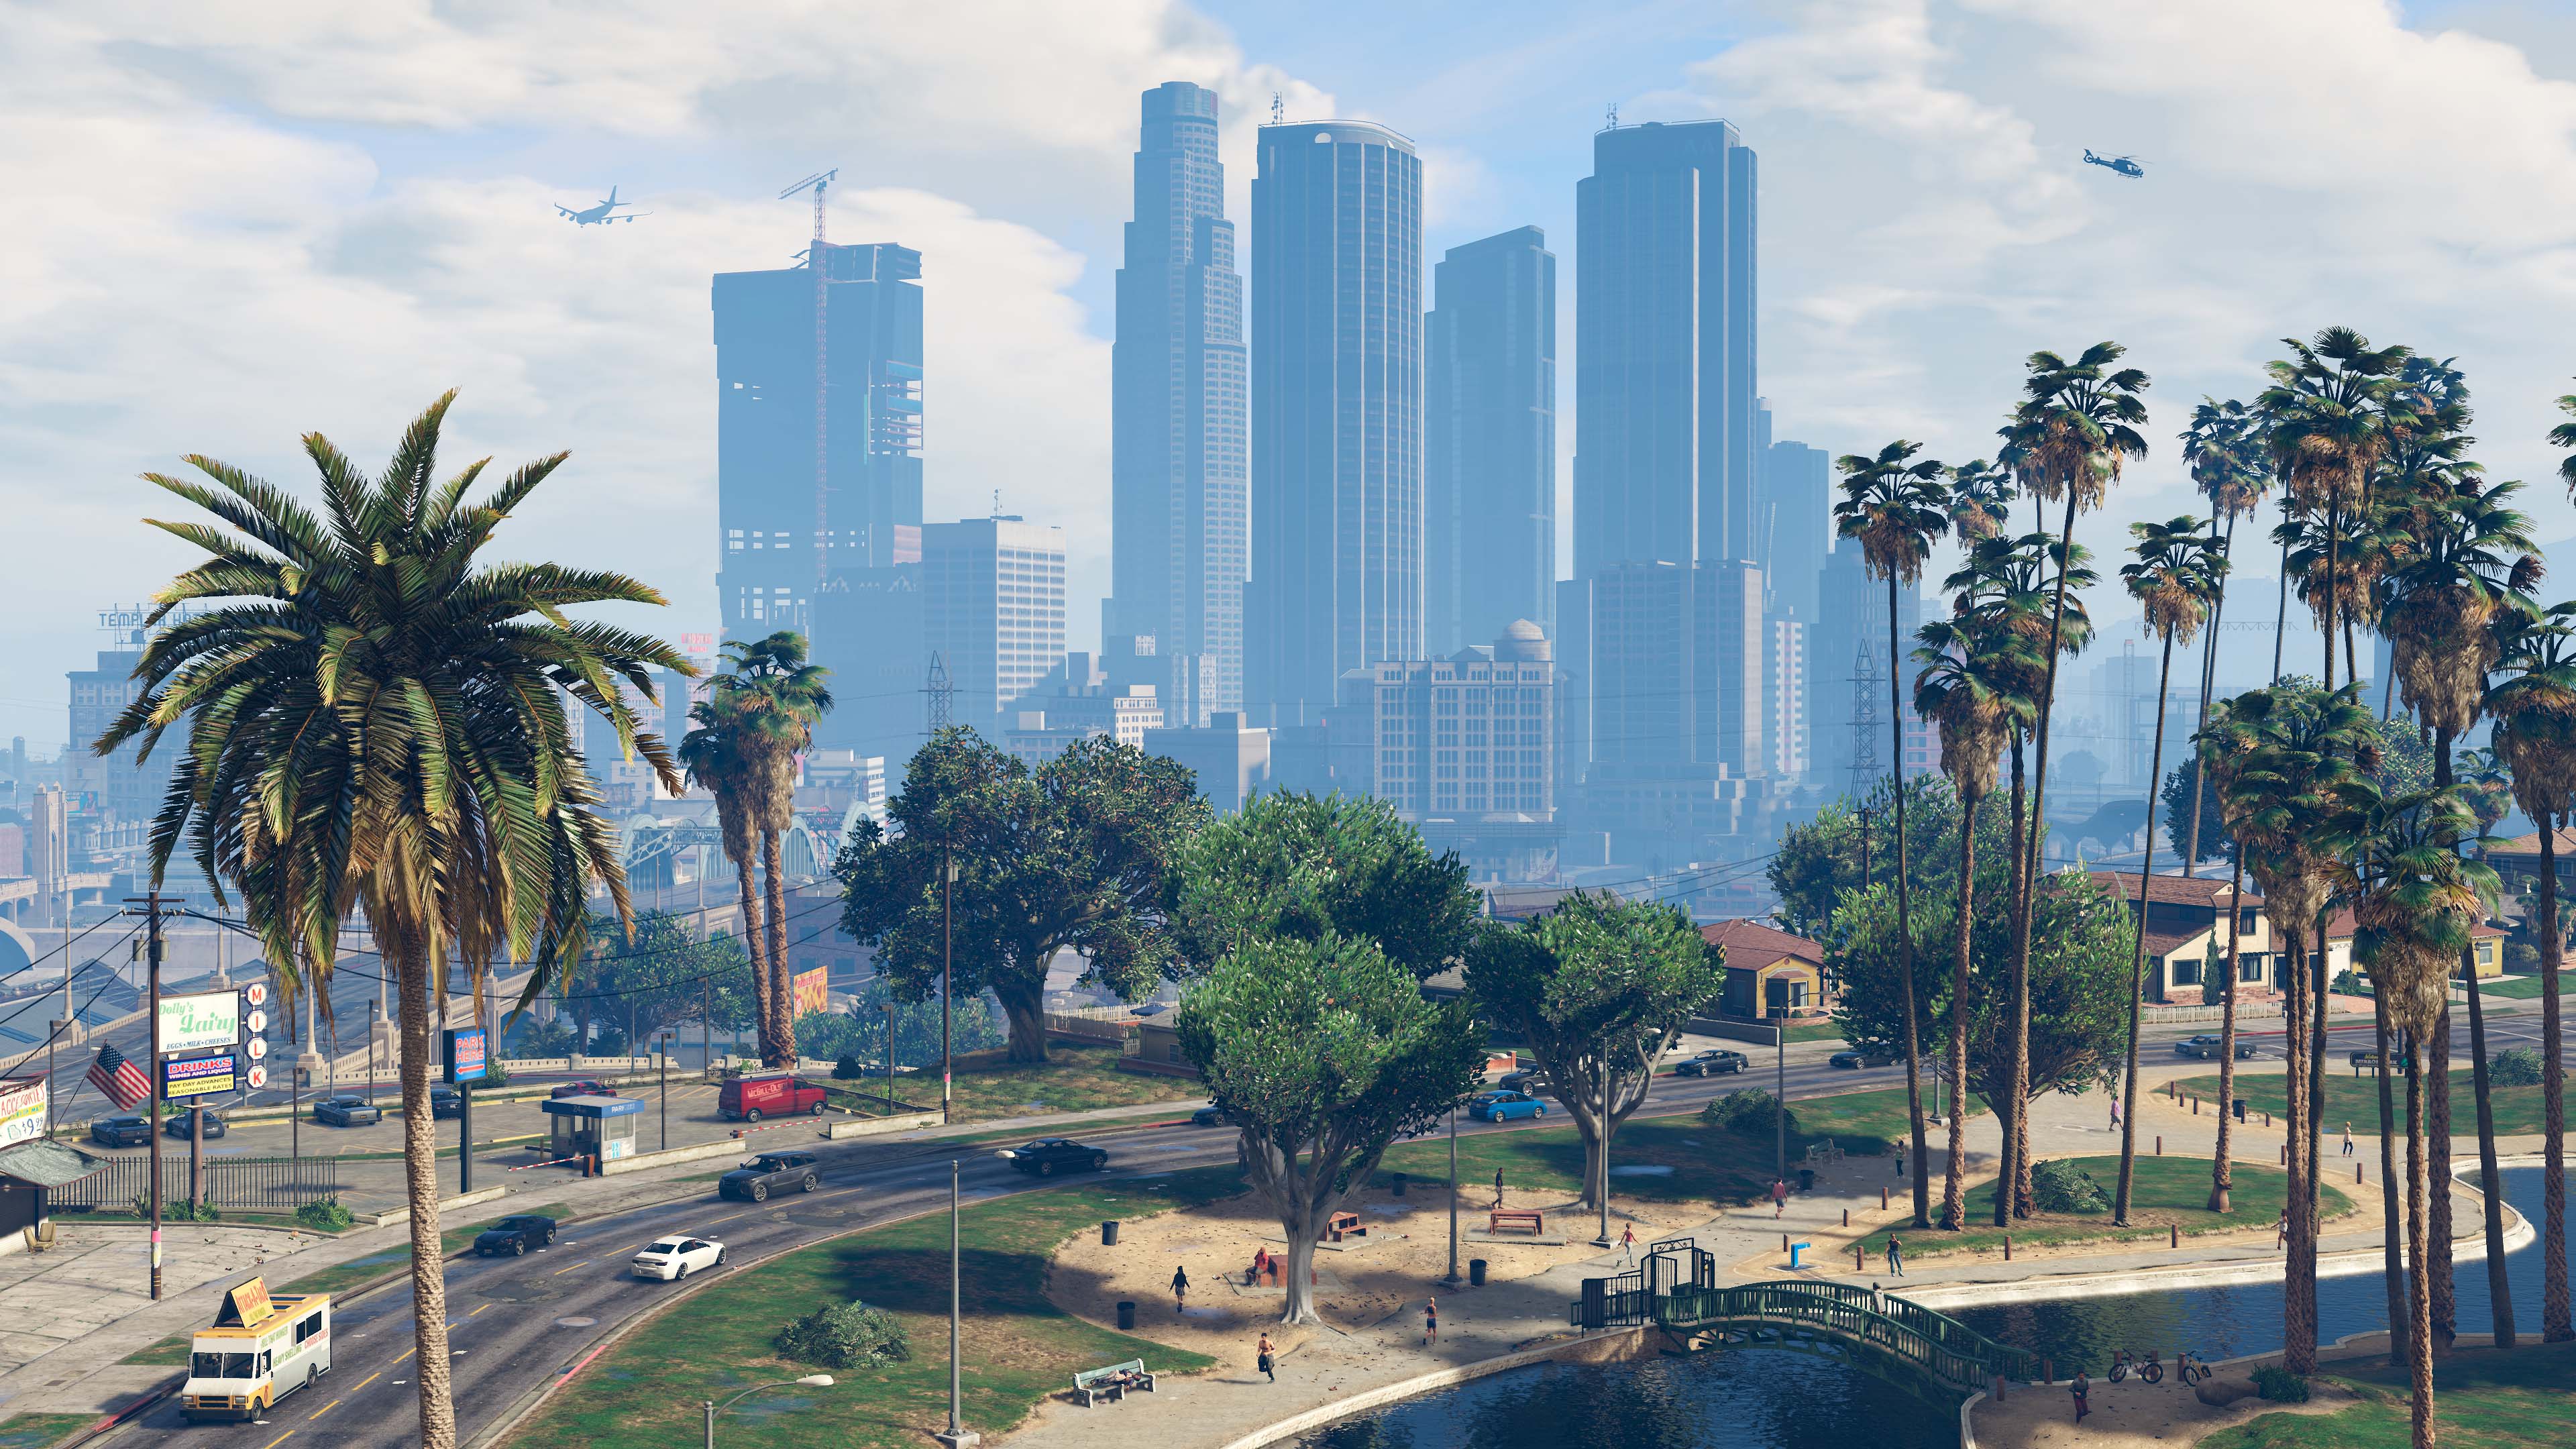 The city of Los Santos in Grand Theft Auto 5, one of the best sandbox games on PS5